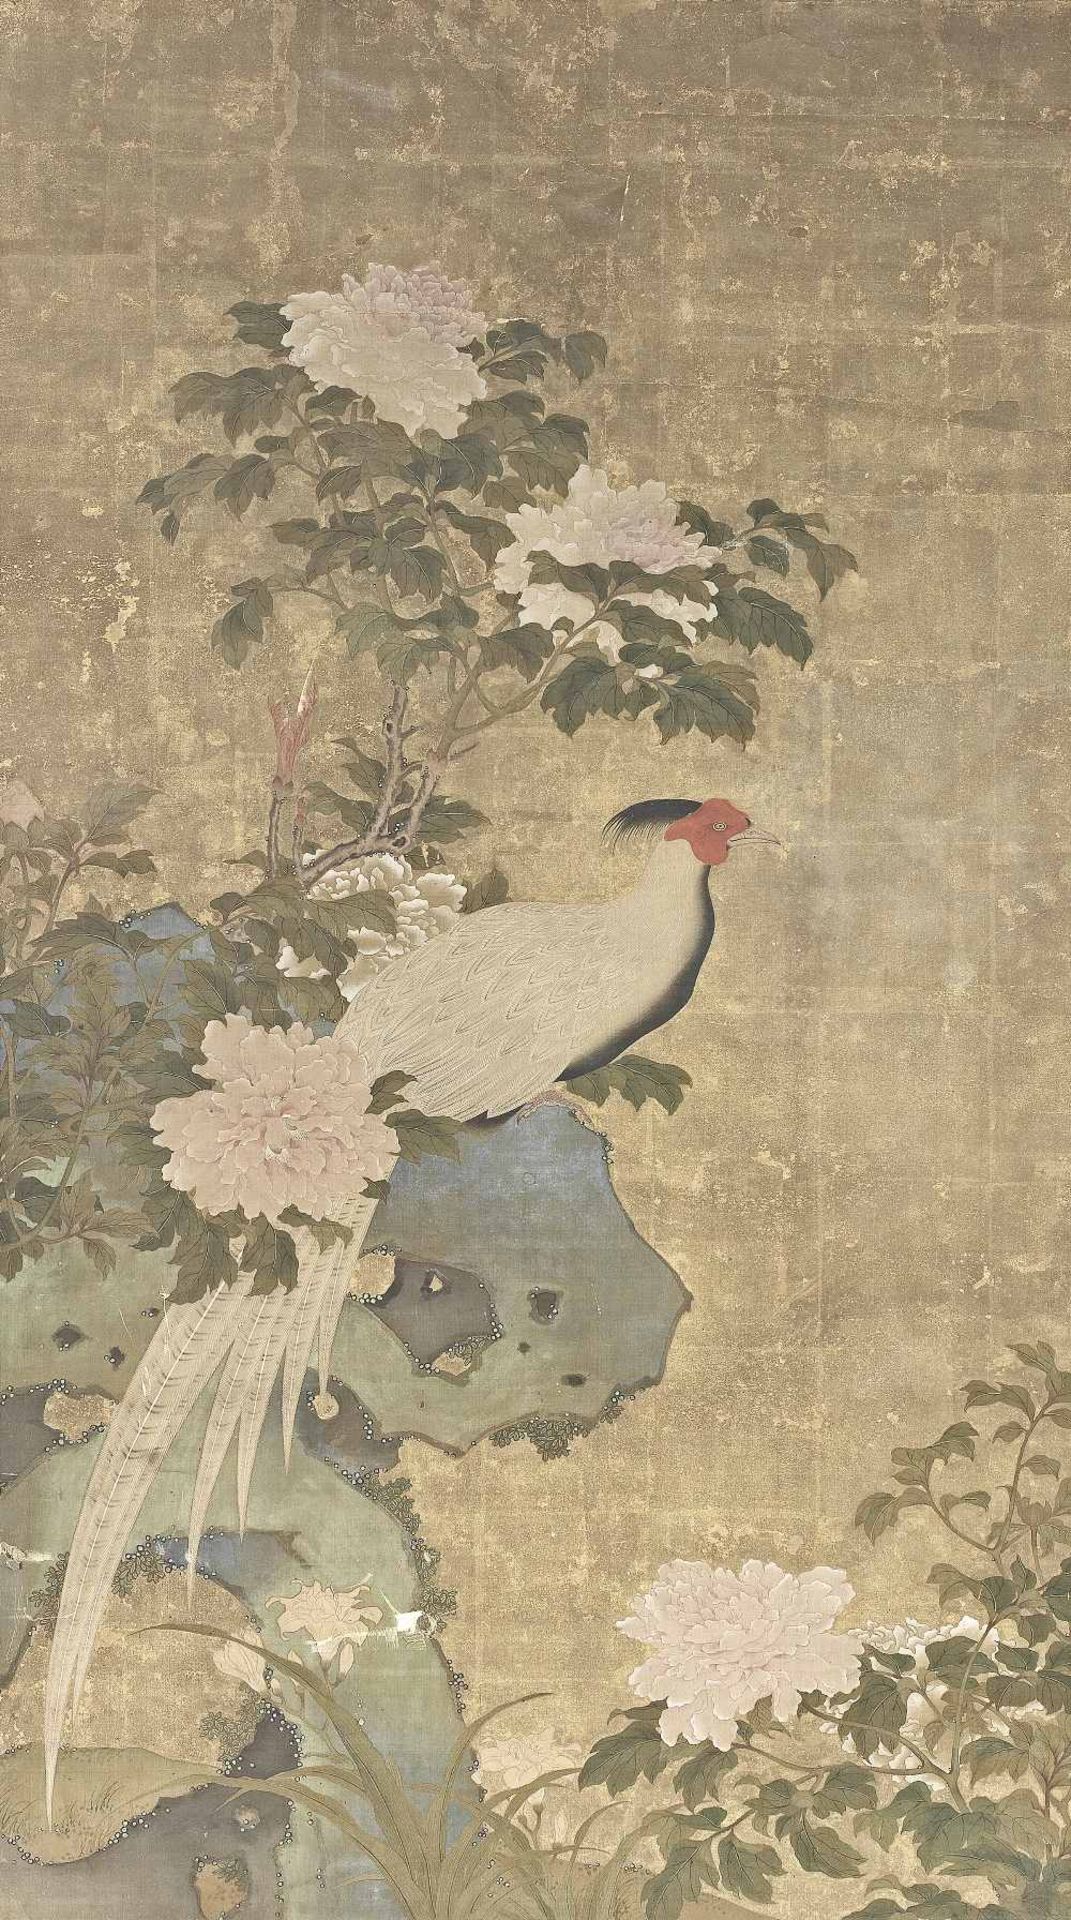 ANONYMOUS (17TH/18TH CENTURY) Pheasant and Peonies